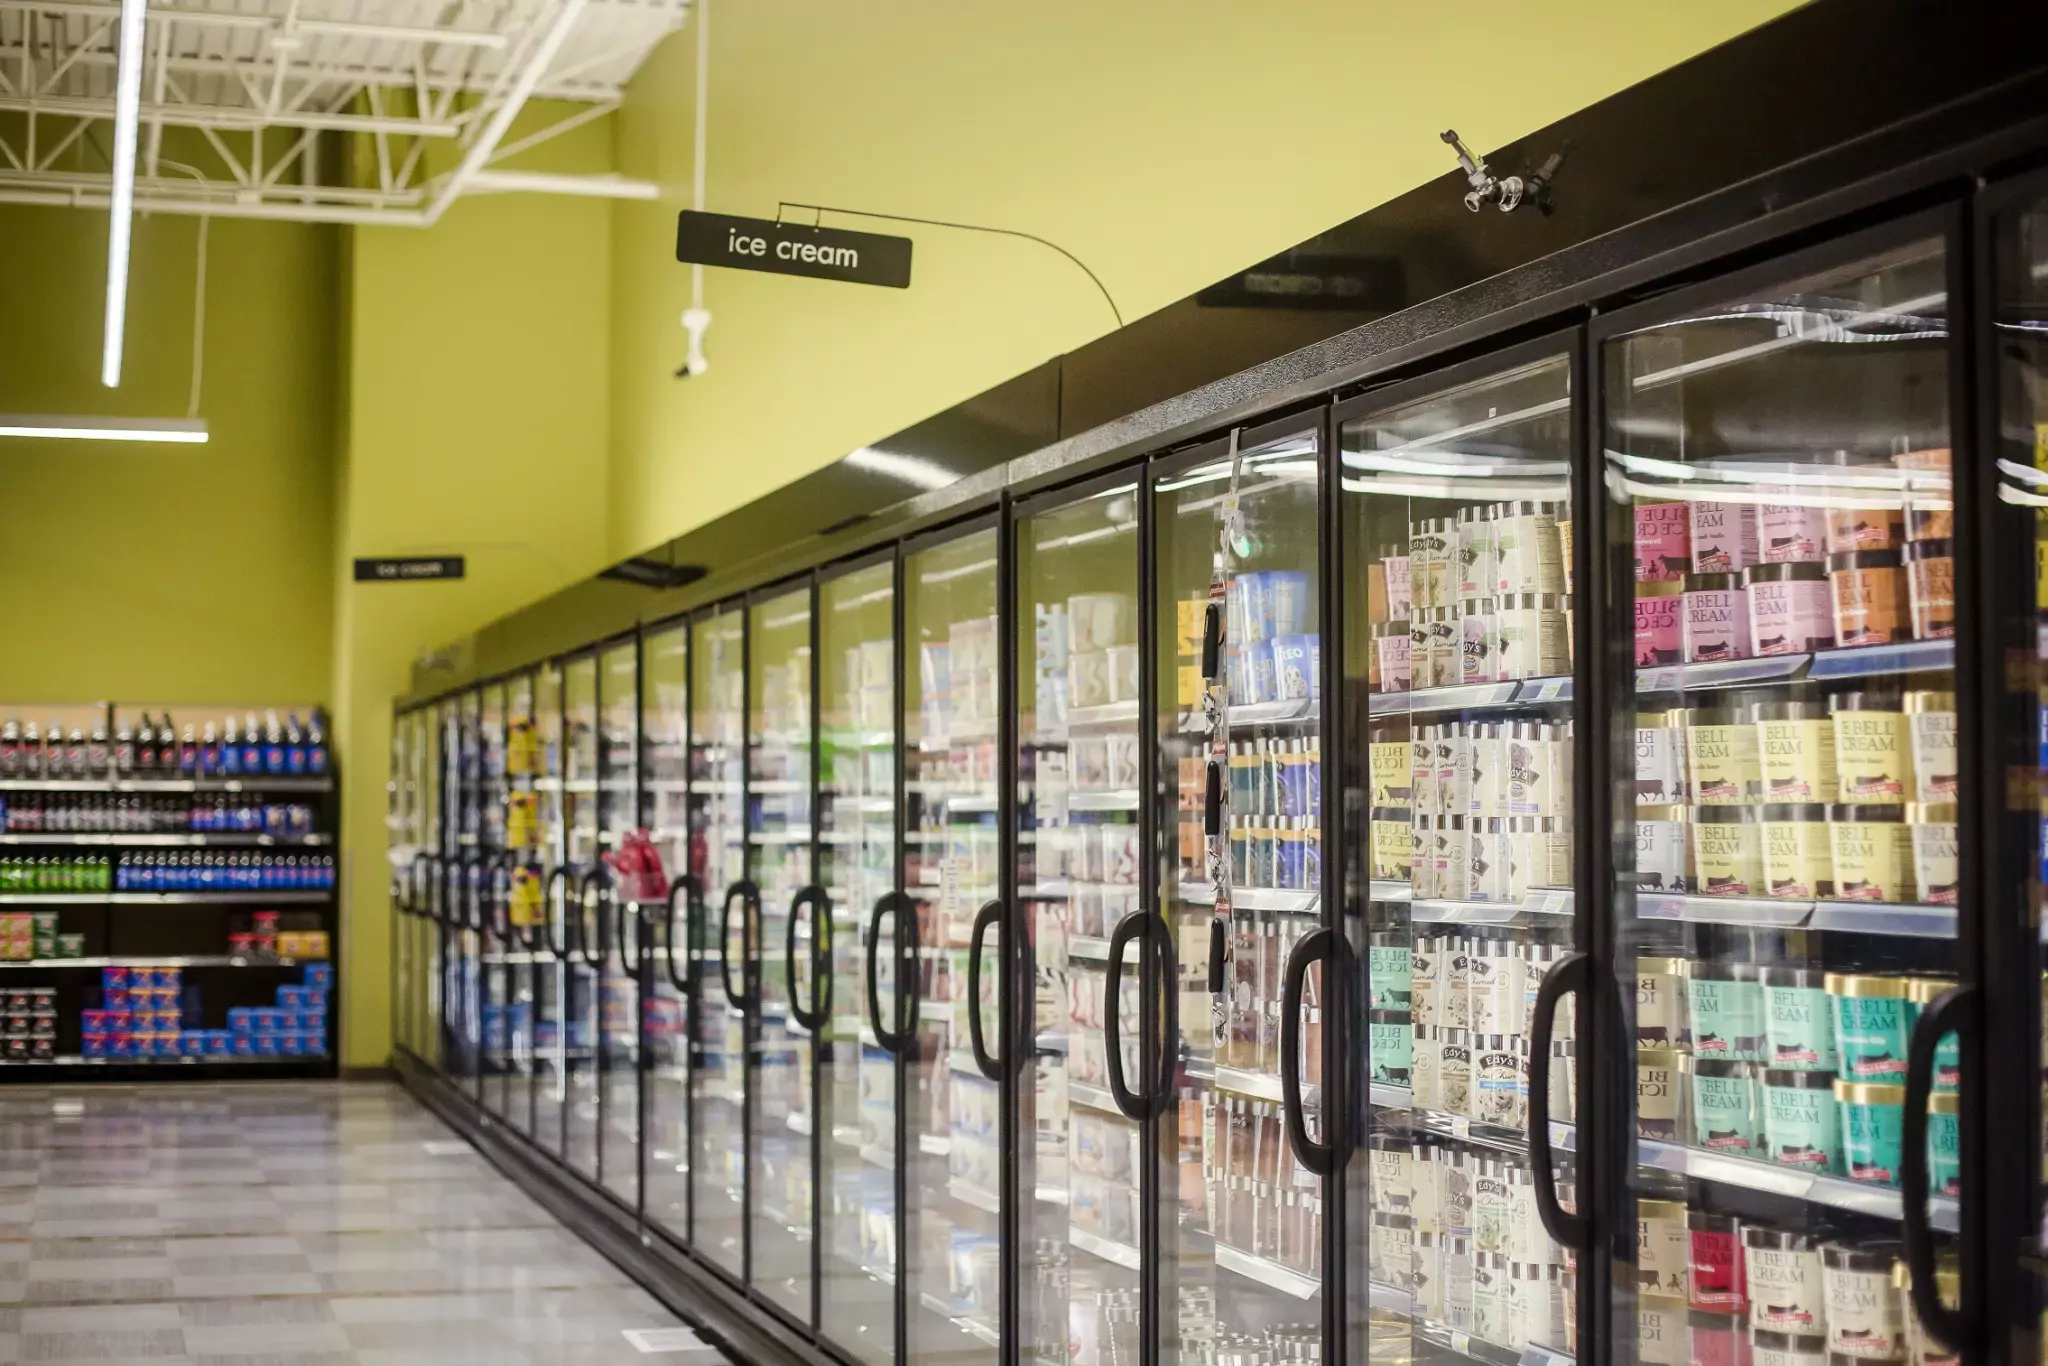 aisle of ice cream in grocery store